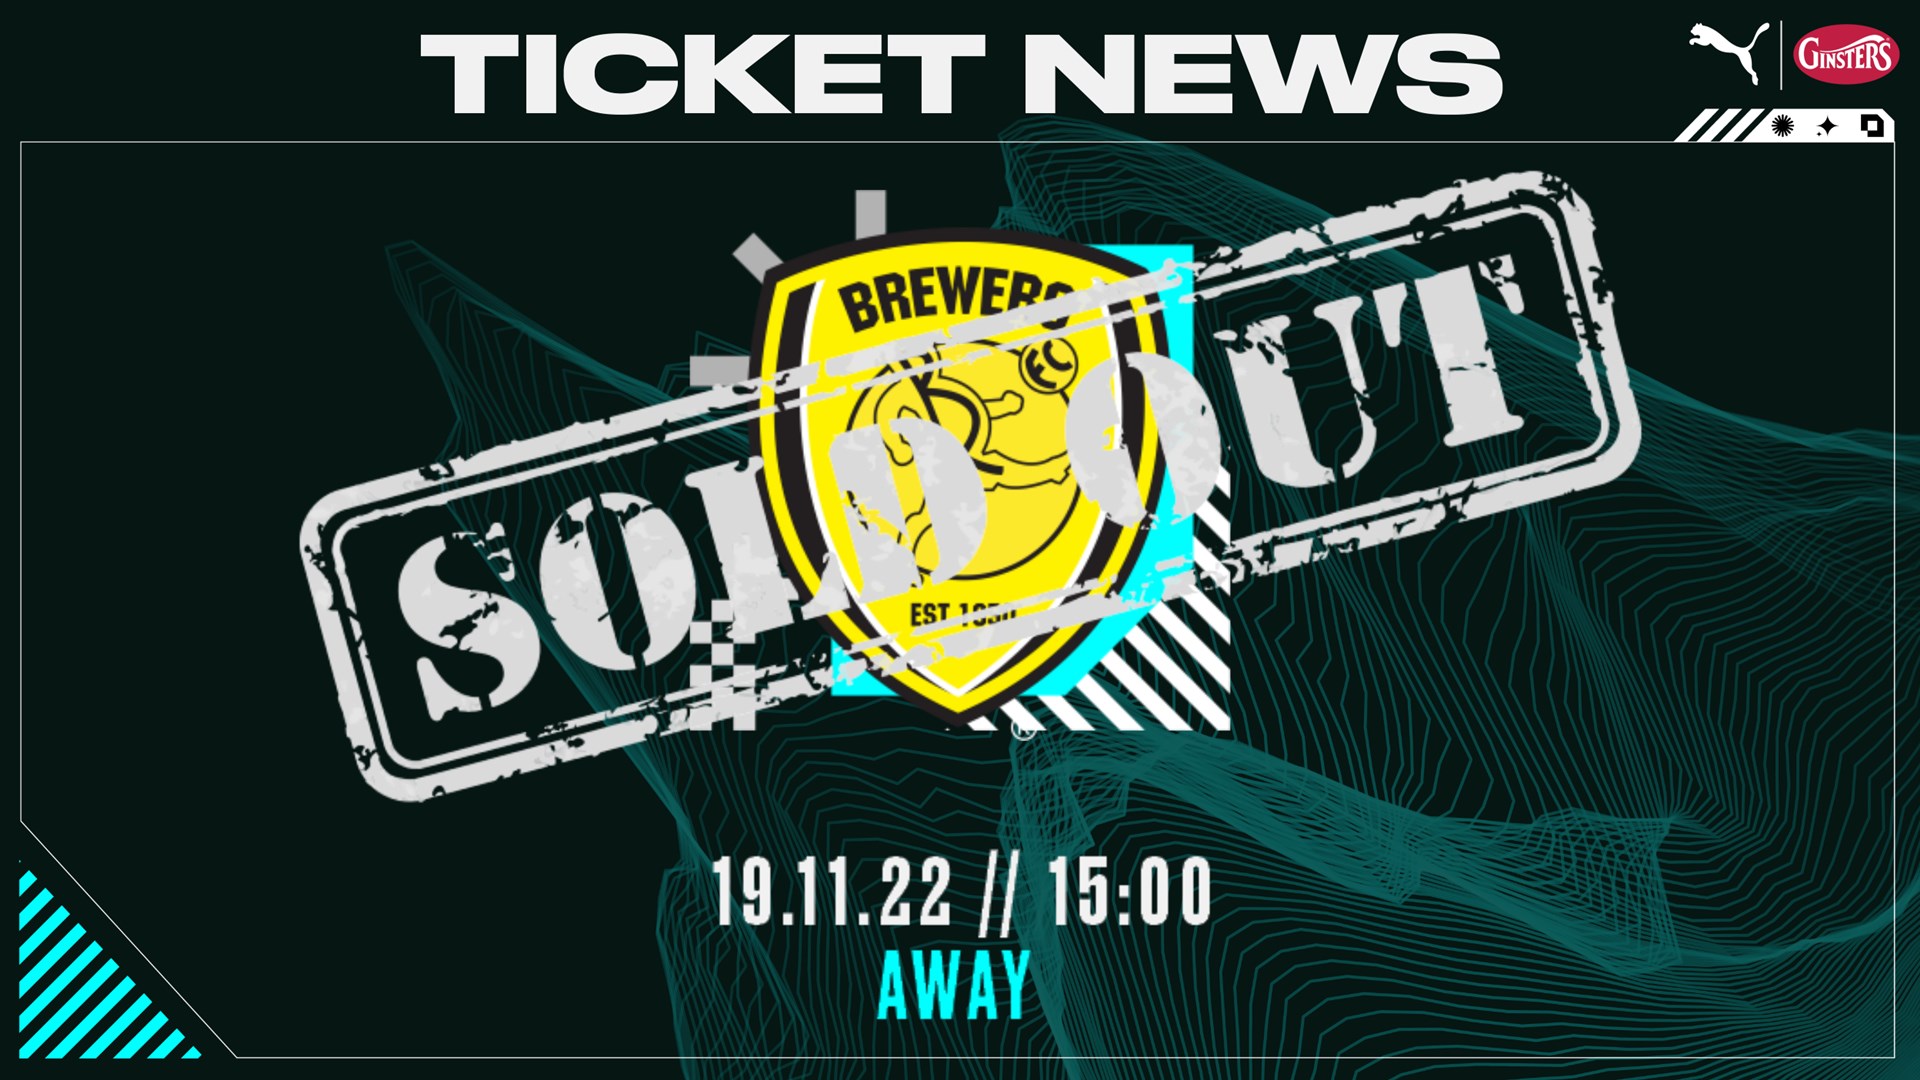 Burton Away tickets sold out